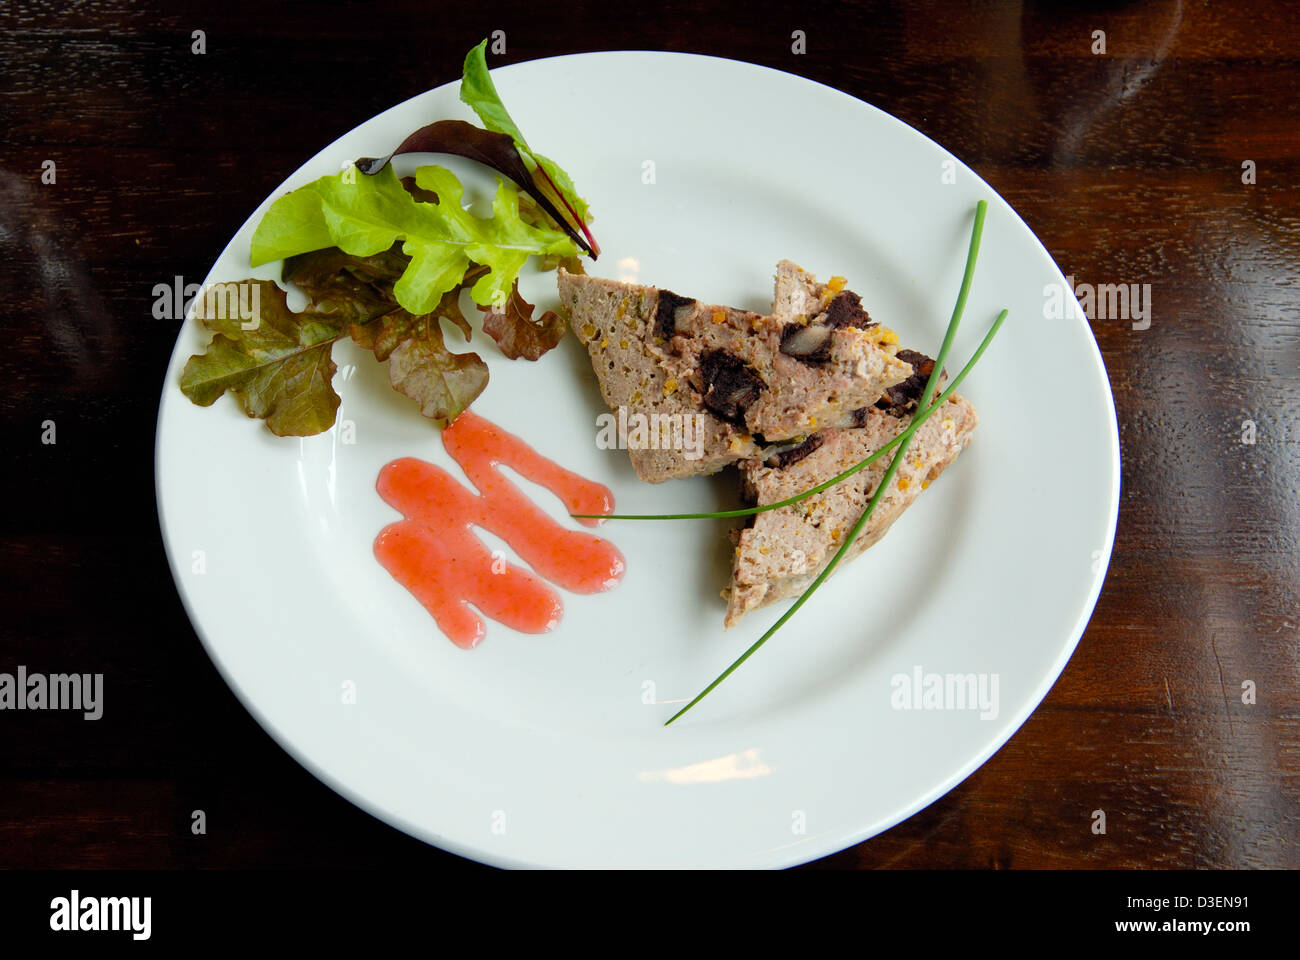 Pork and Corvedale black pudding terrine with spiced plum jelly at the White House restaurant Shropshire Stock Photo